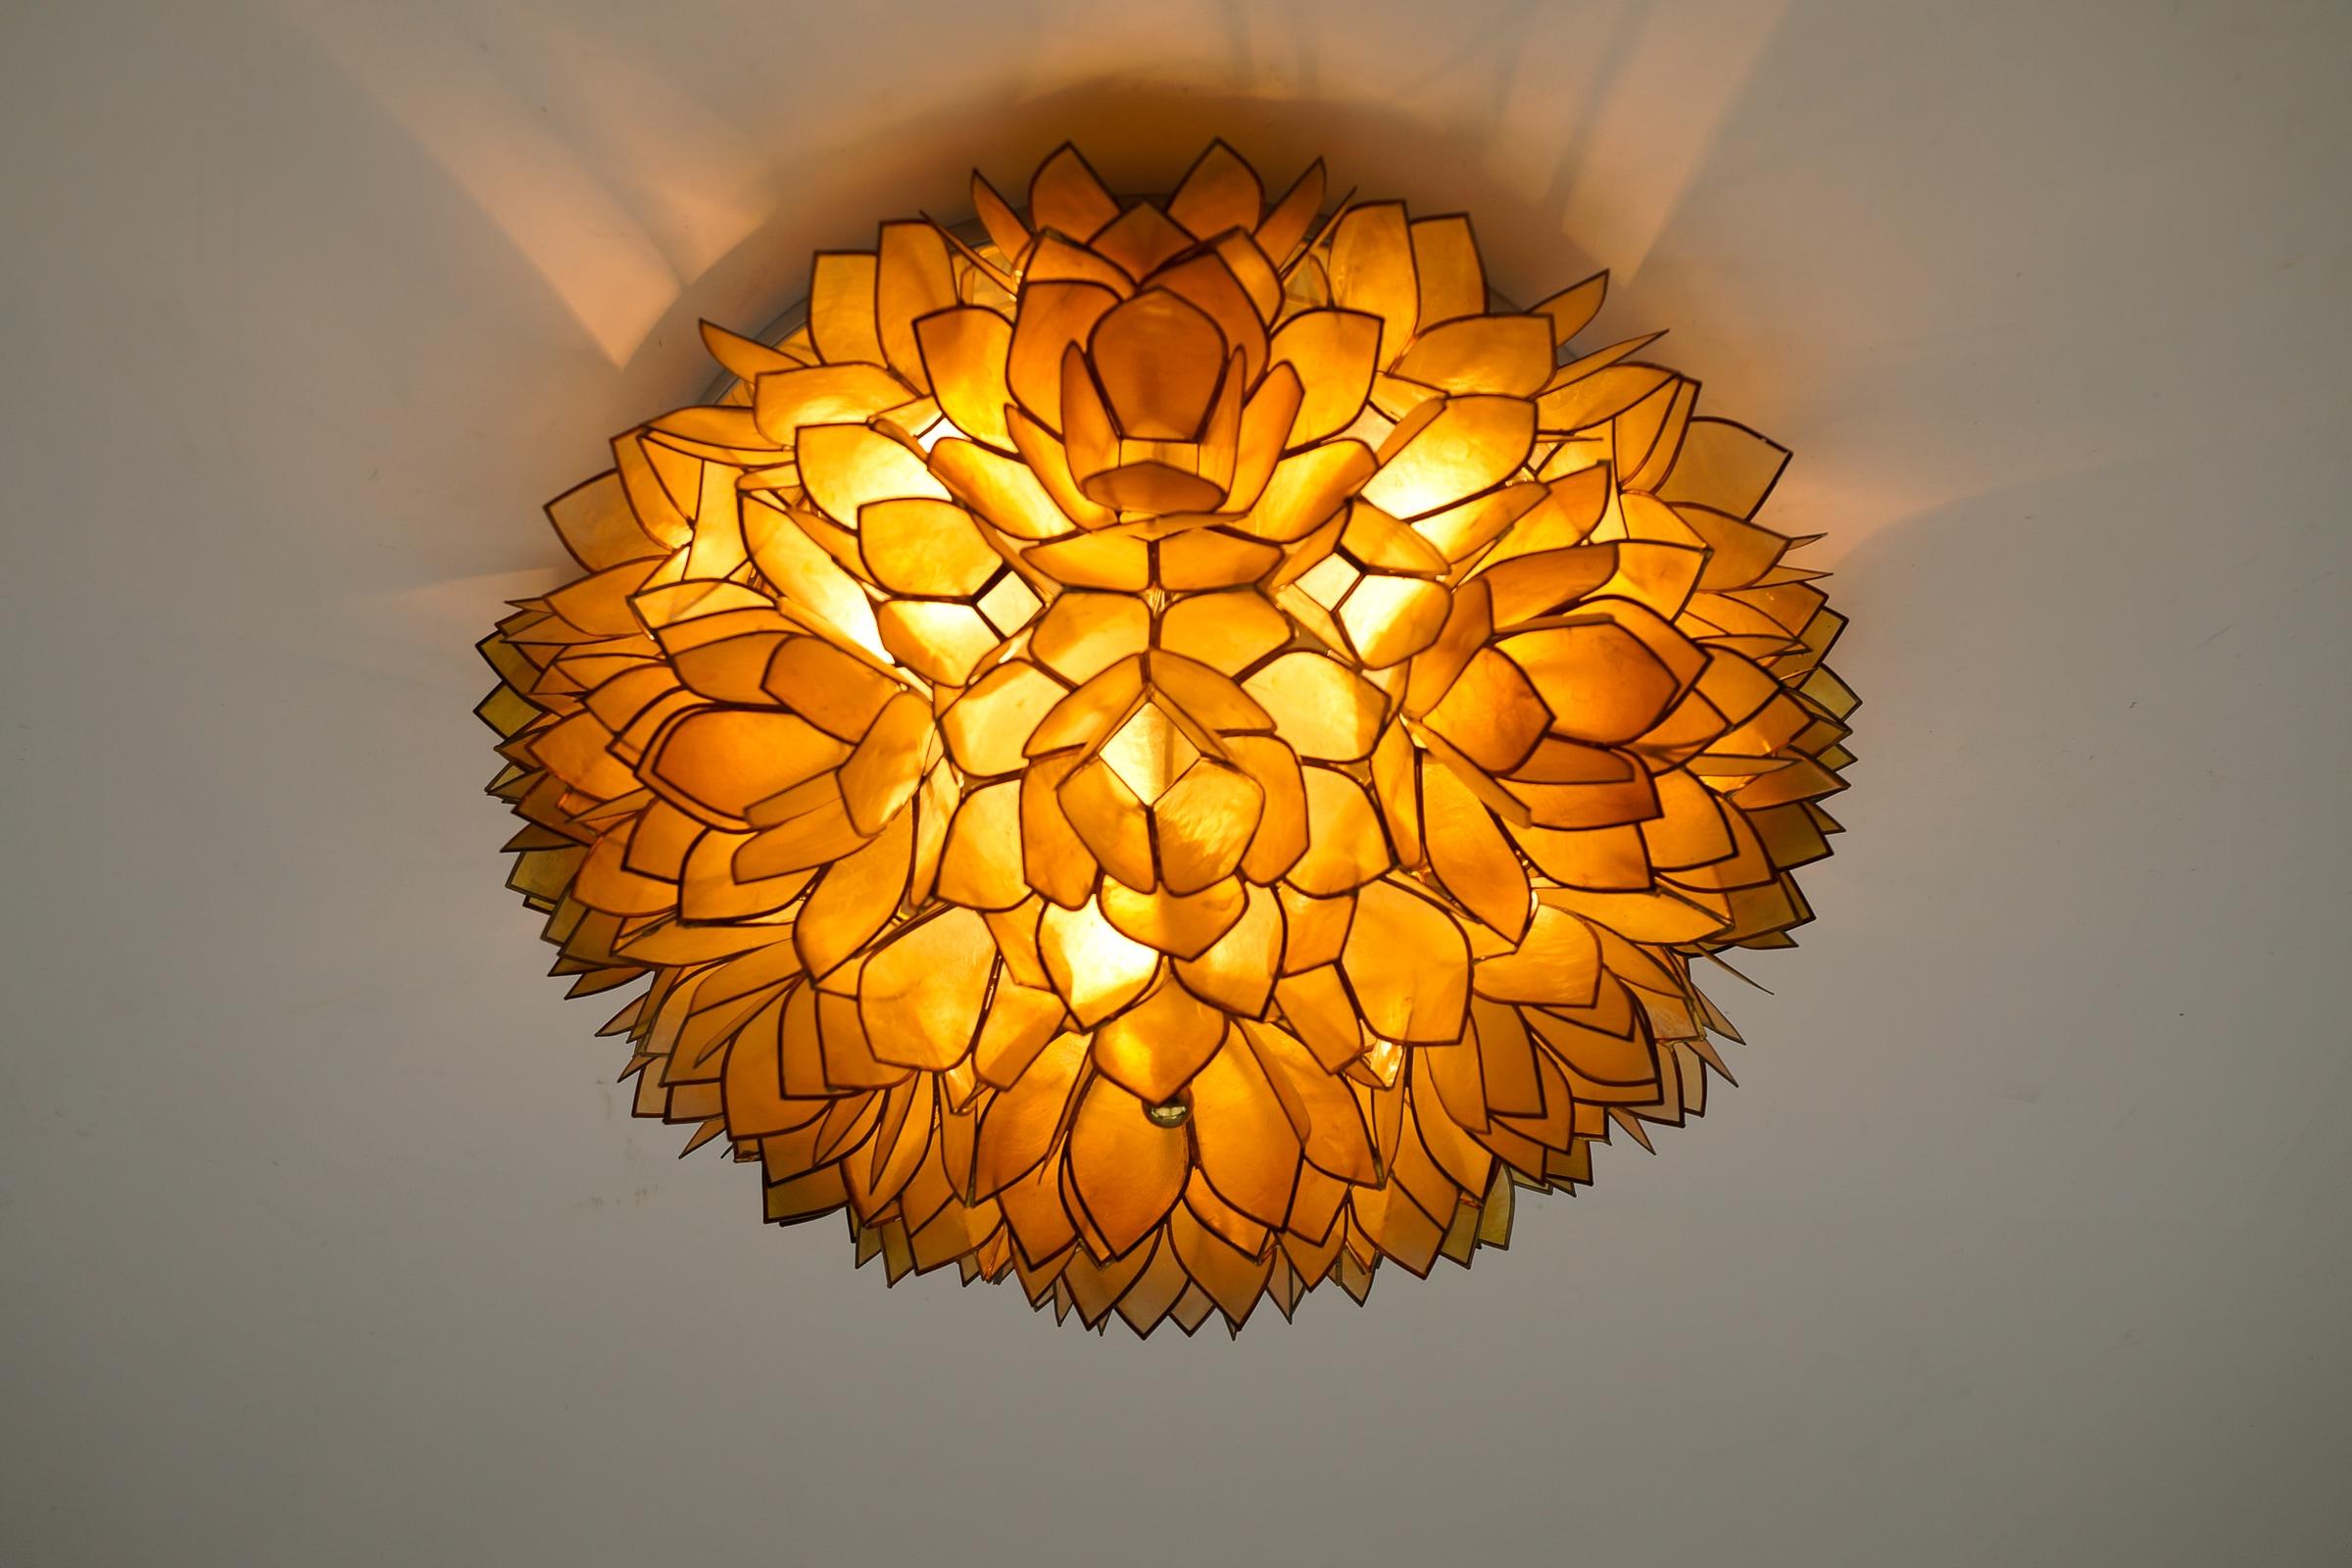 Flower Spherical Wall or Ceiling Lamps Made of Mother-of-Pearl in Yellow, 1960s For Sale 1